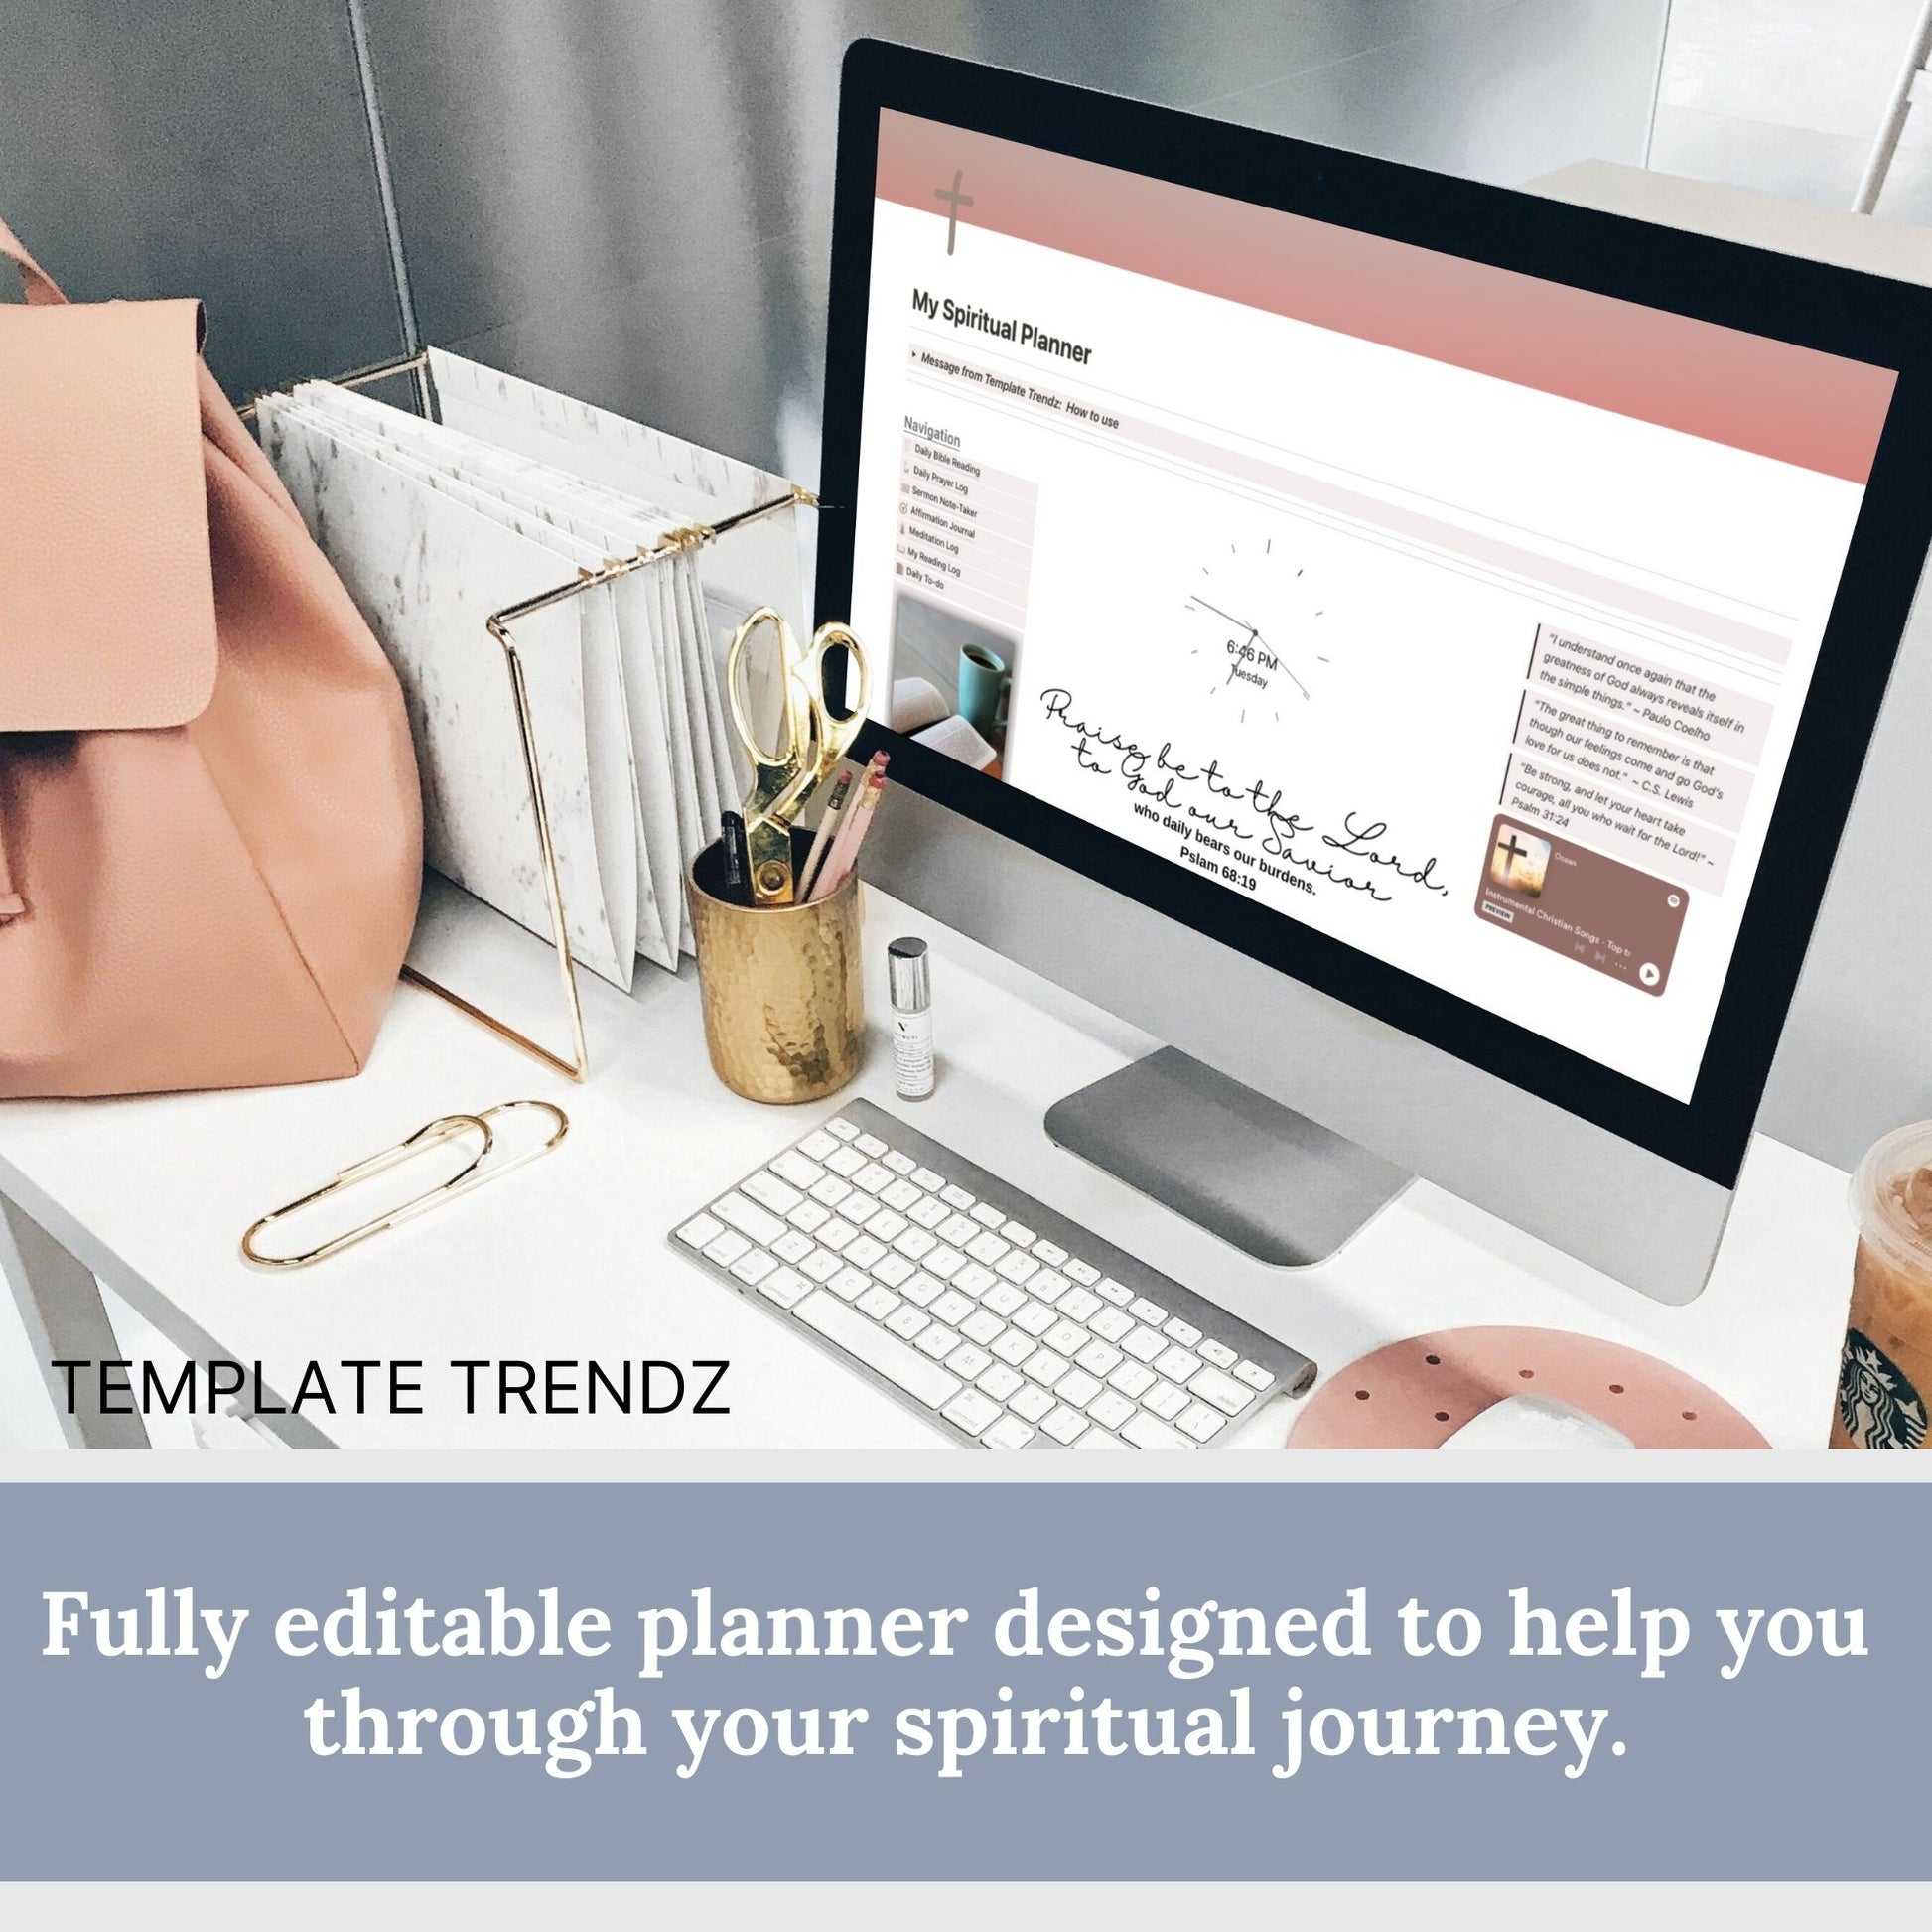 Crafted with devotion, this versatile Spiritual Journal Notion template is your daily companion for reflection and connection. Discover your spiritual gifts, nurture your faith, and cultivate a closer relationship with the divine.